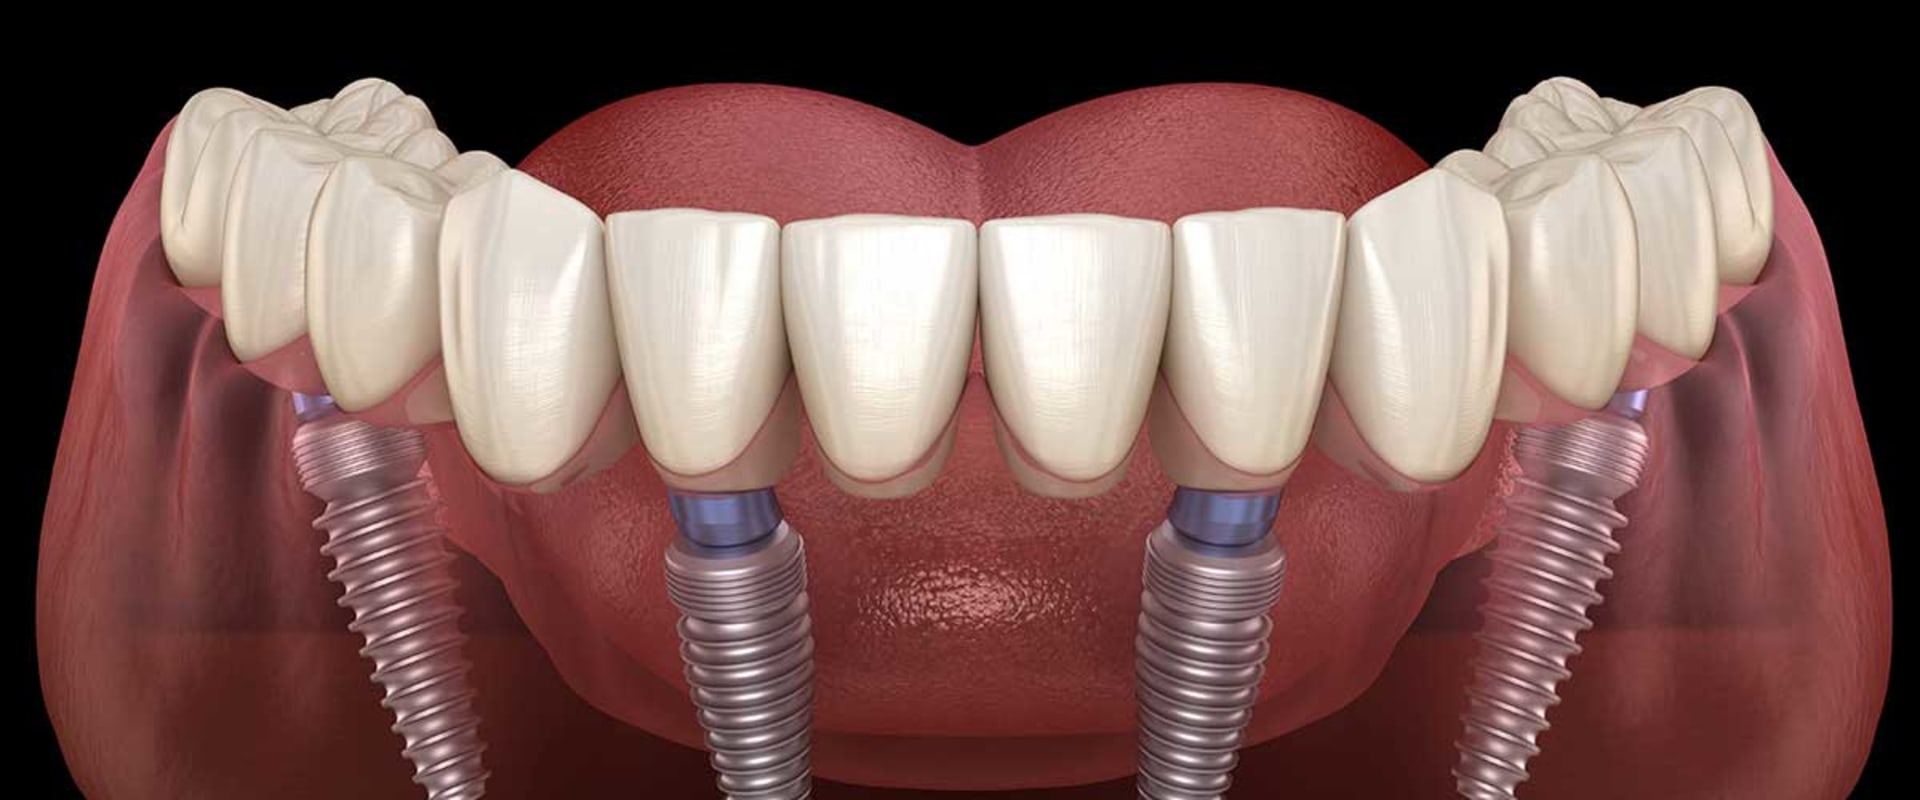 Will All-on-4 Dental Implants Affect Your Facial Appearance?